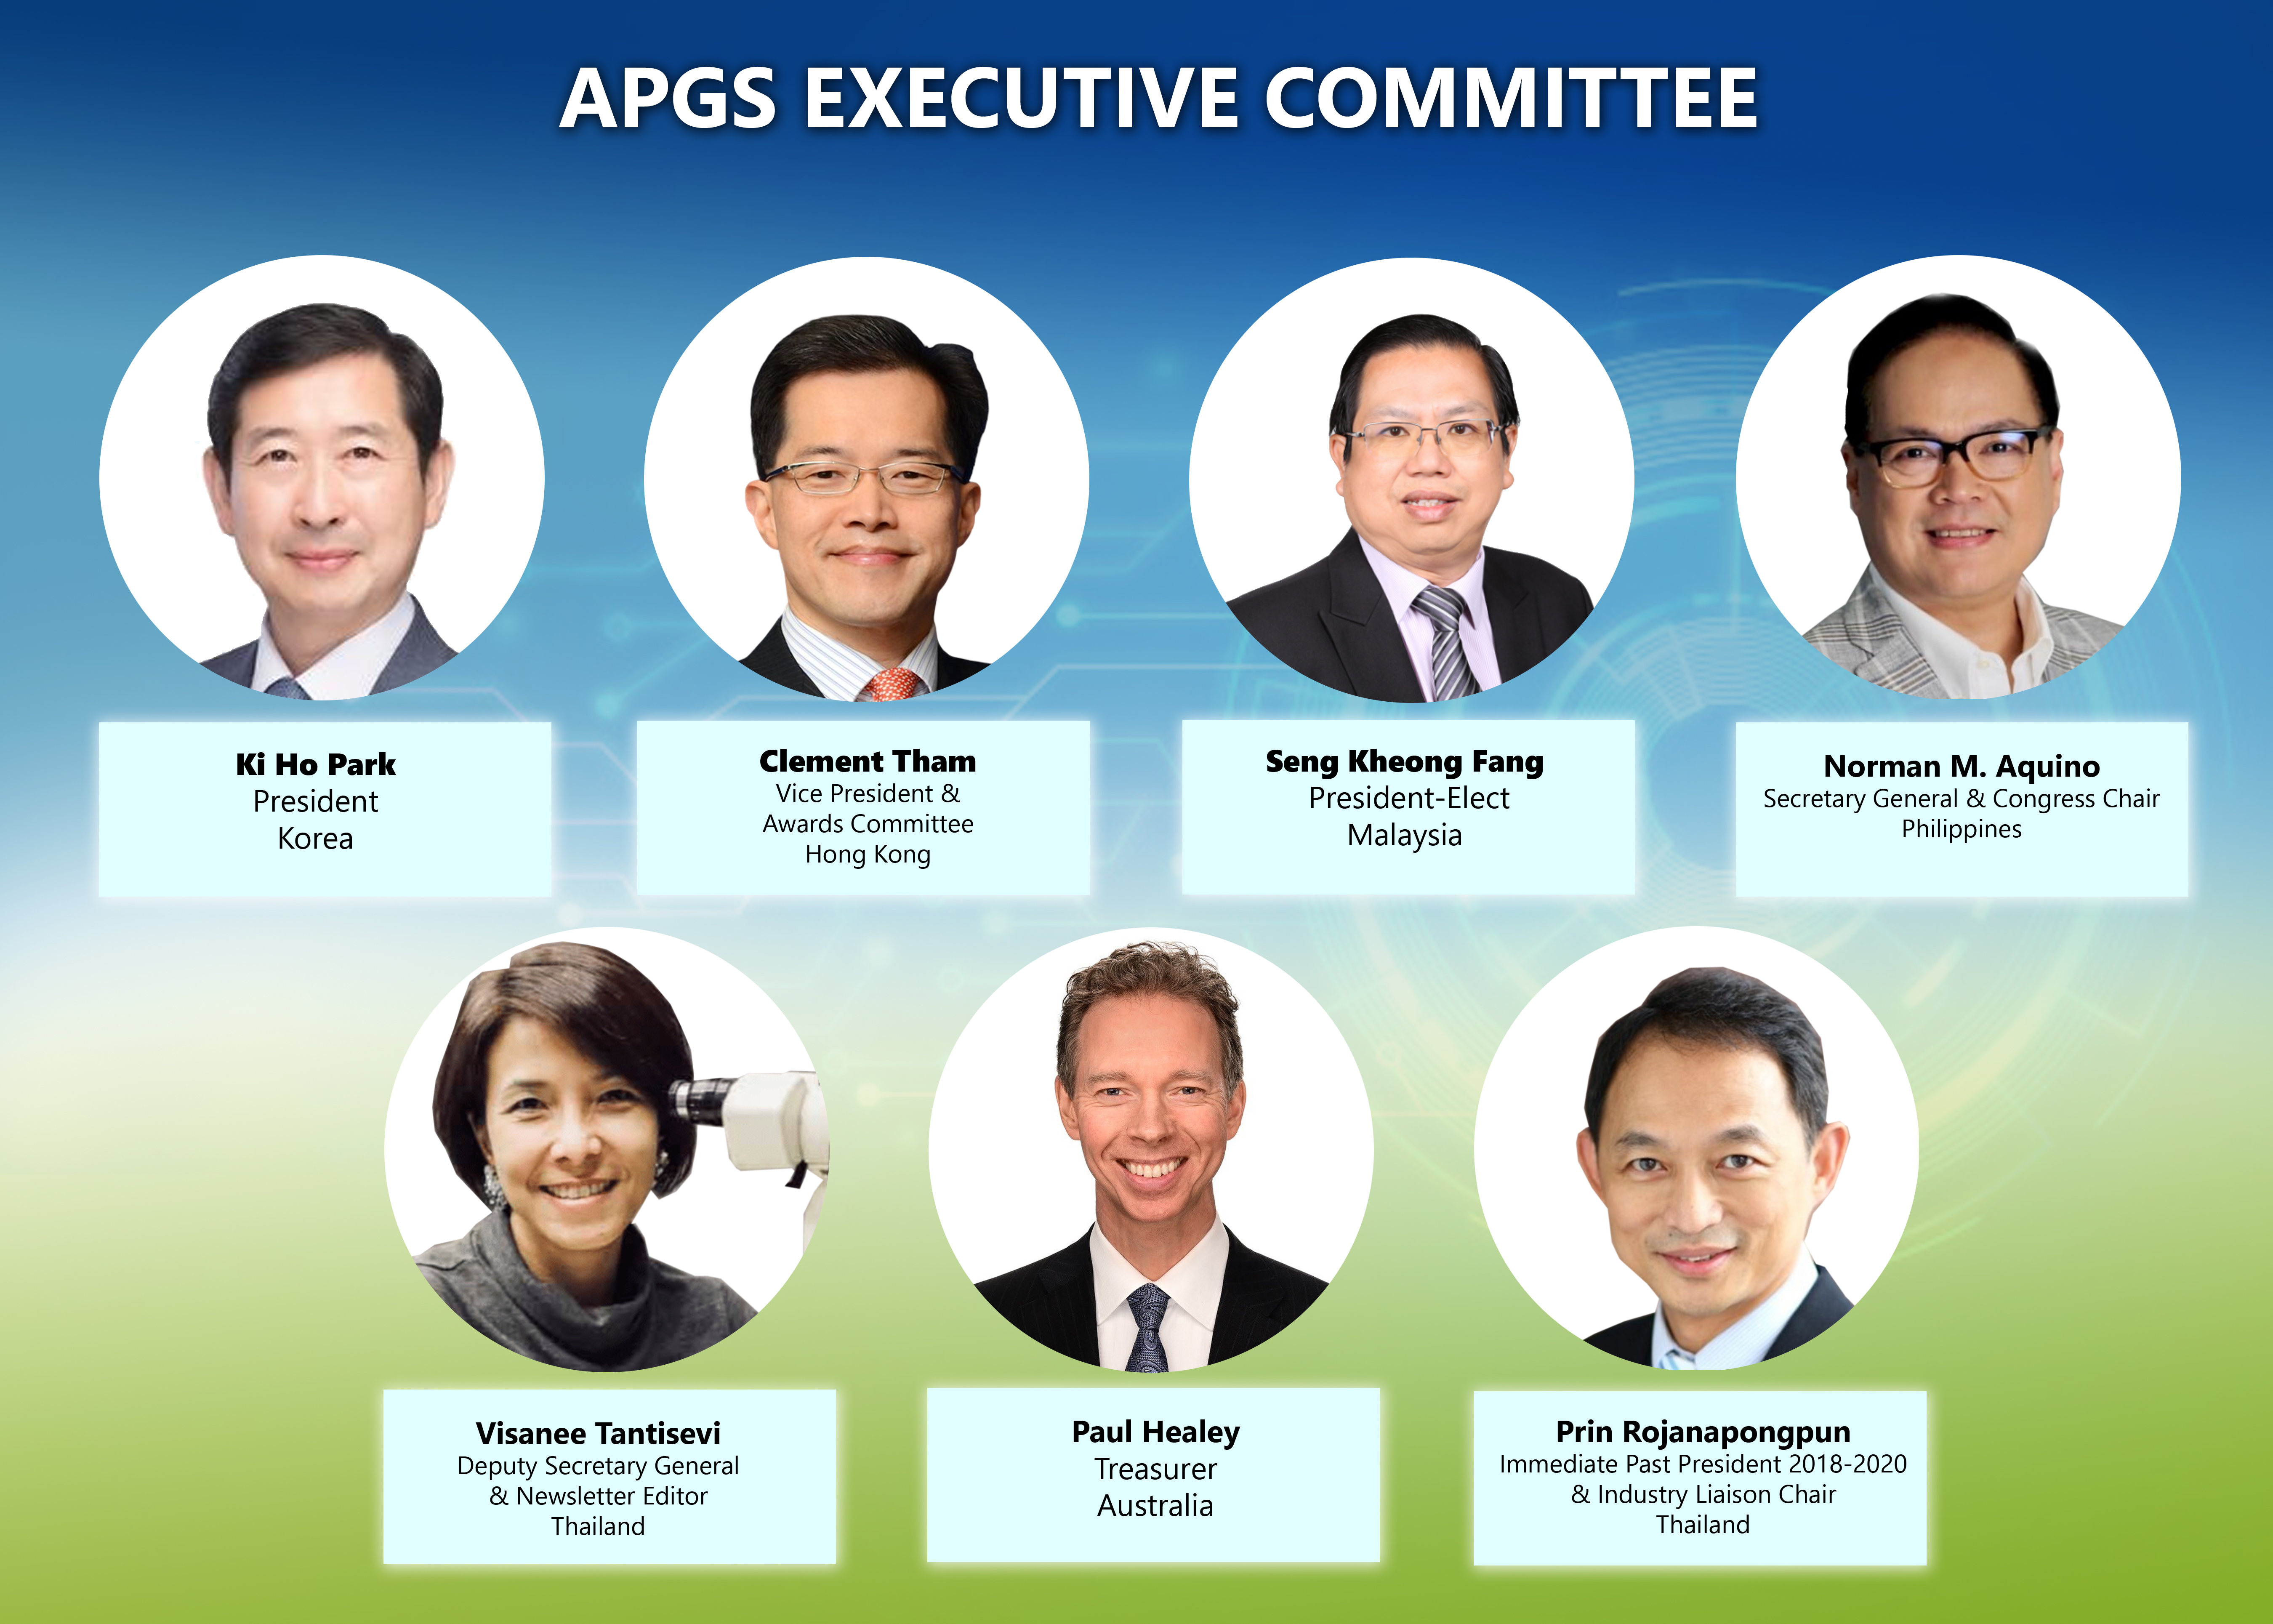 APGS Executive Committee